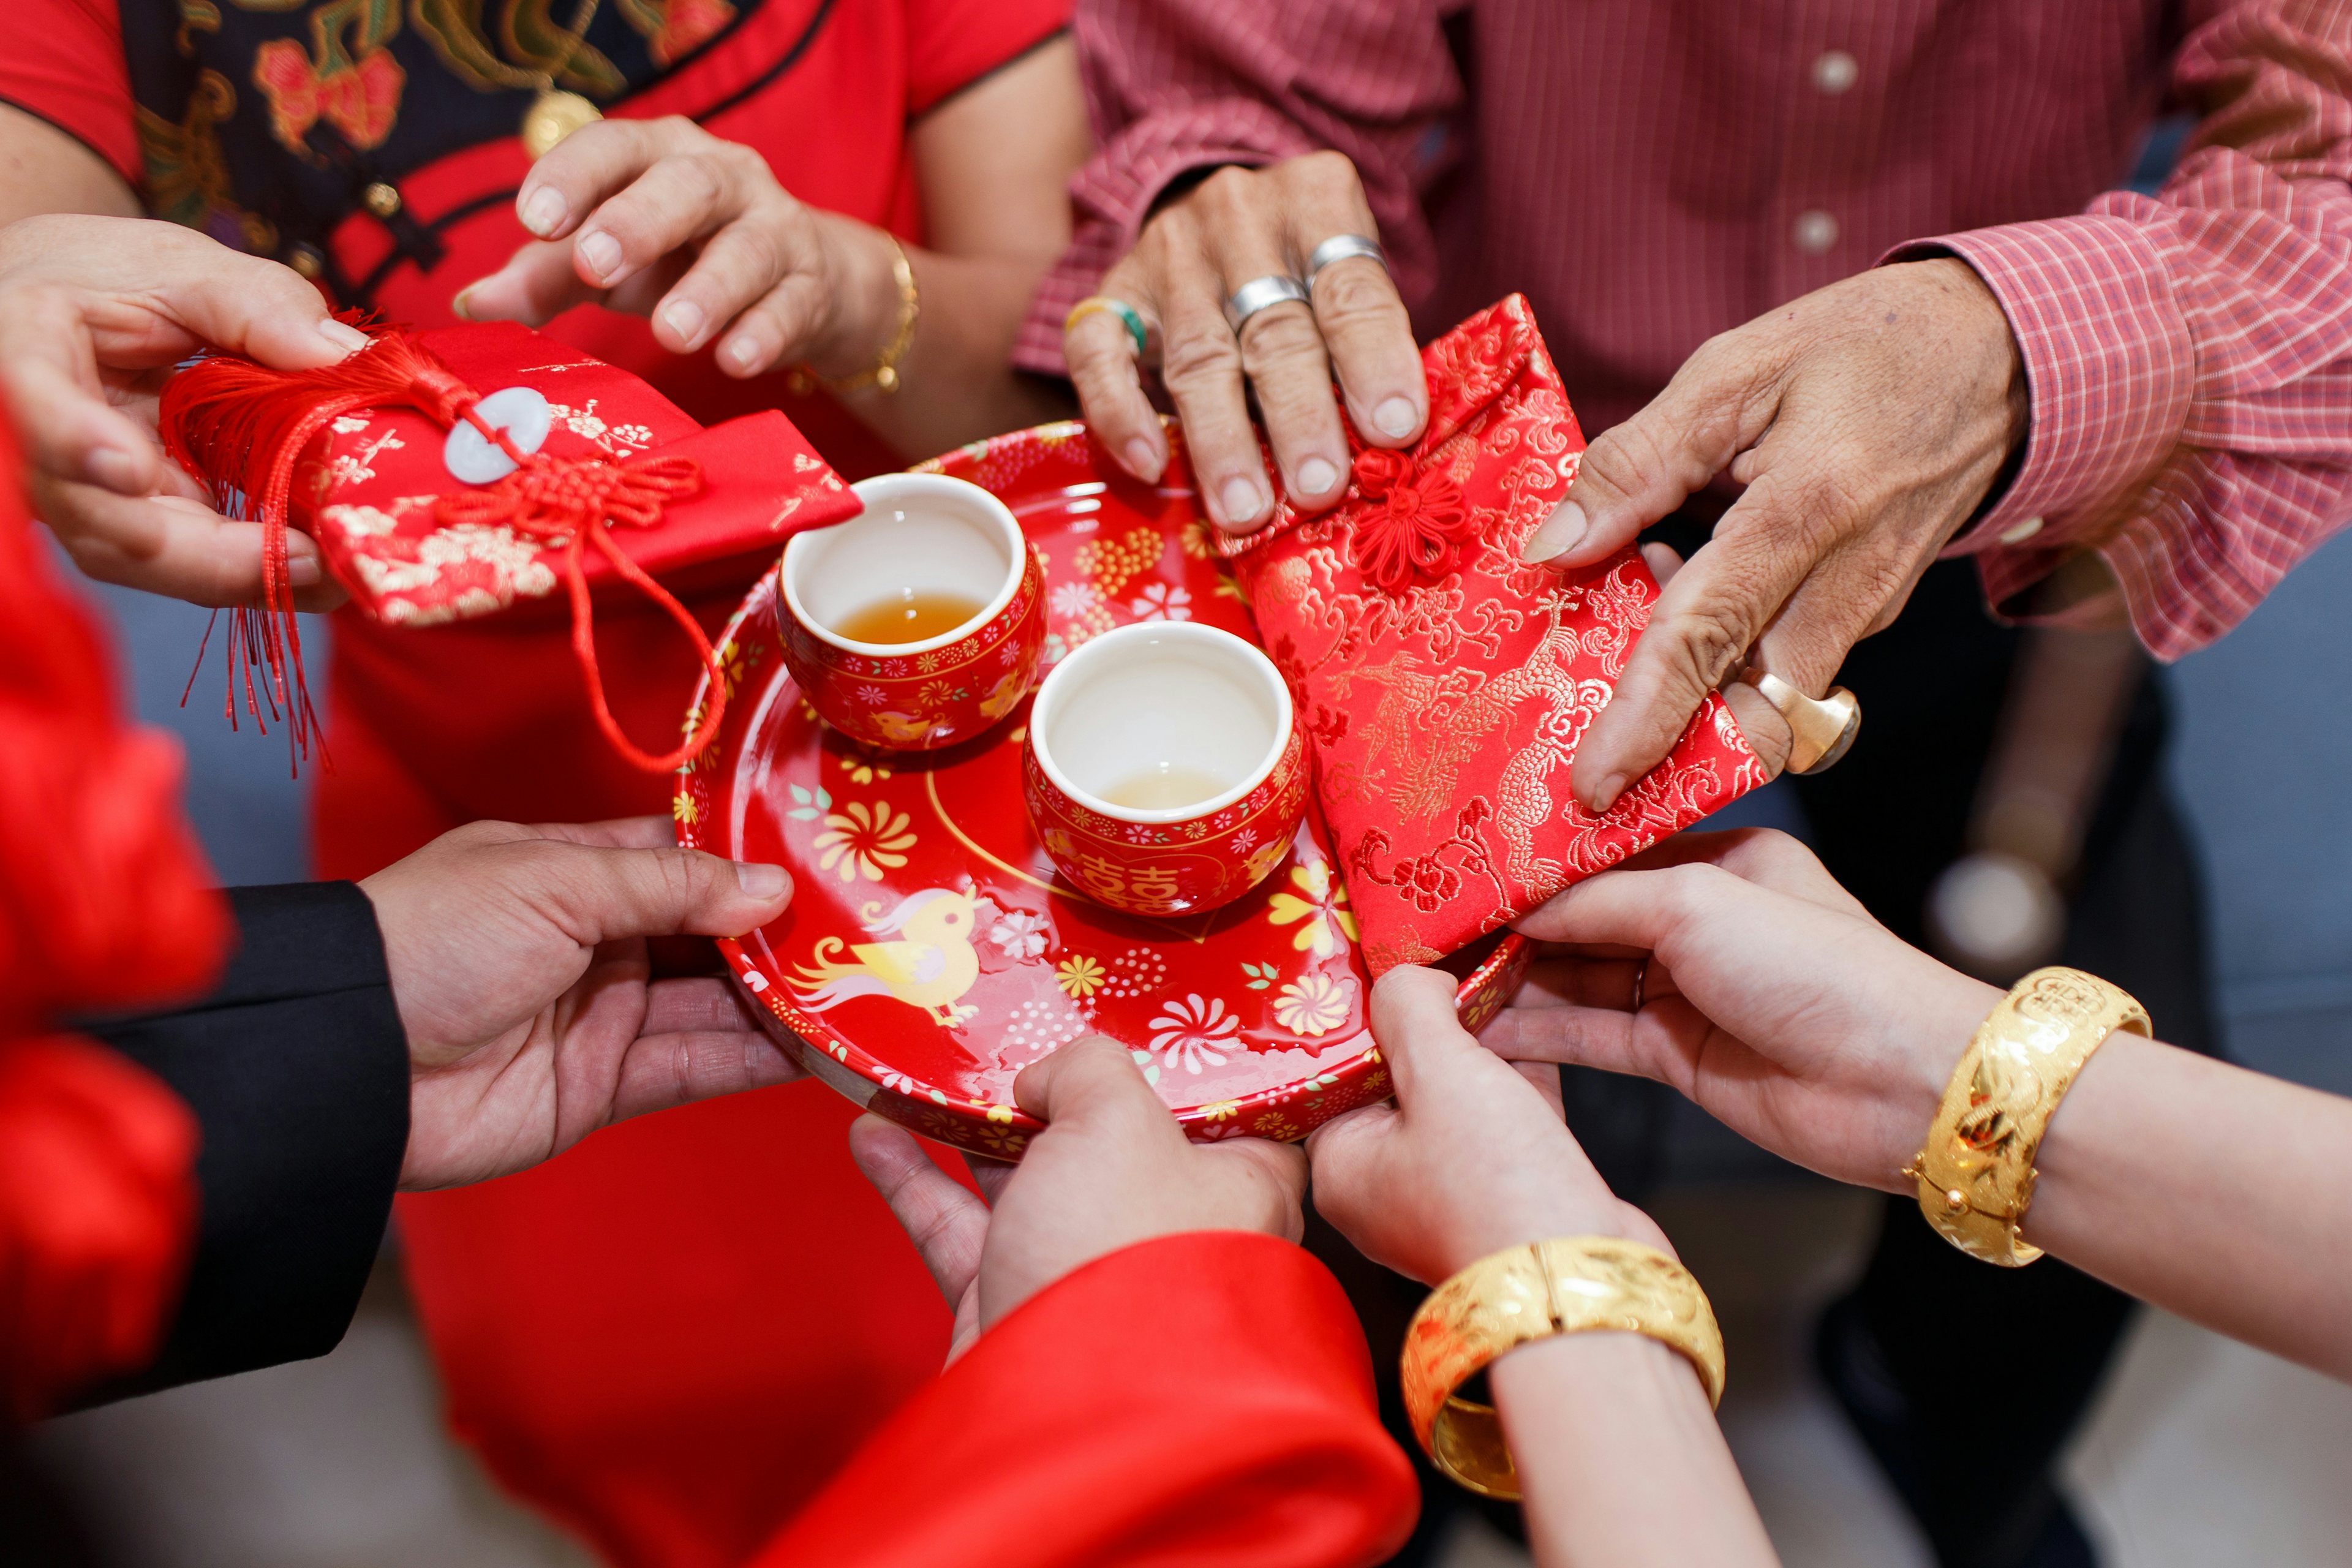 A red envelope, also known as a red packet, is a monetary gift exchanged during holidays or significant events like weddings, graduations, and birthdays. Image: Shutterstock